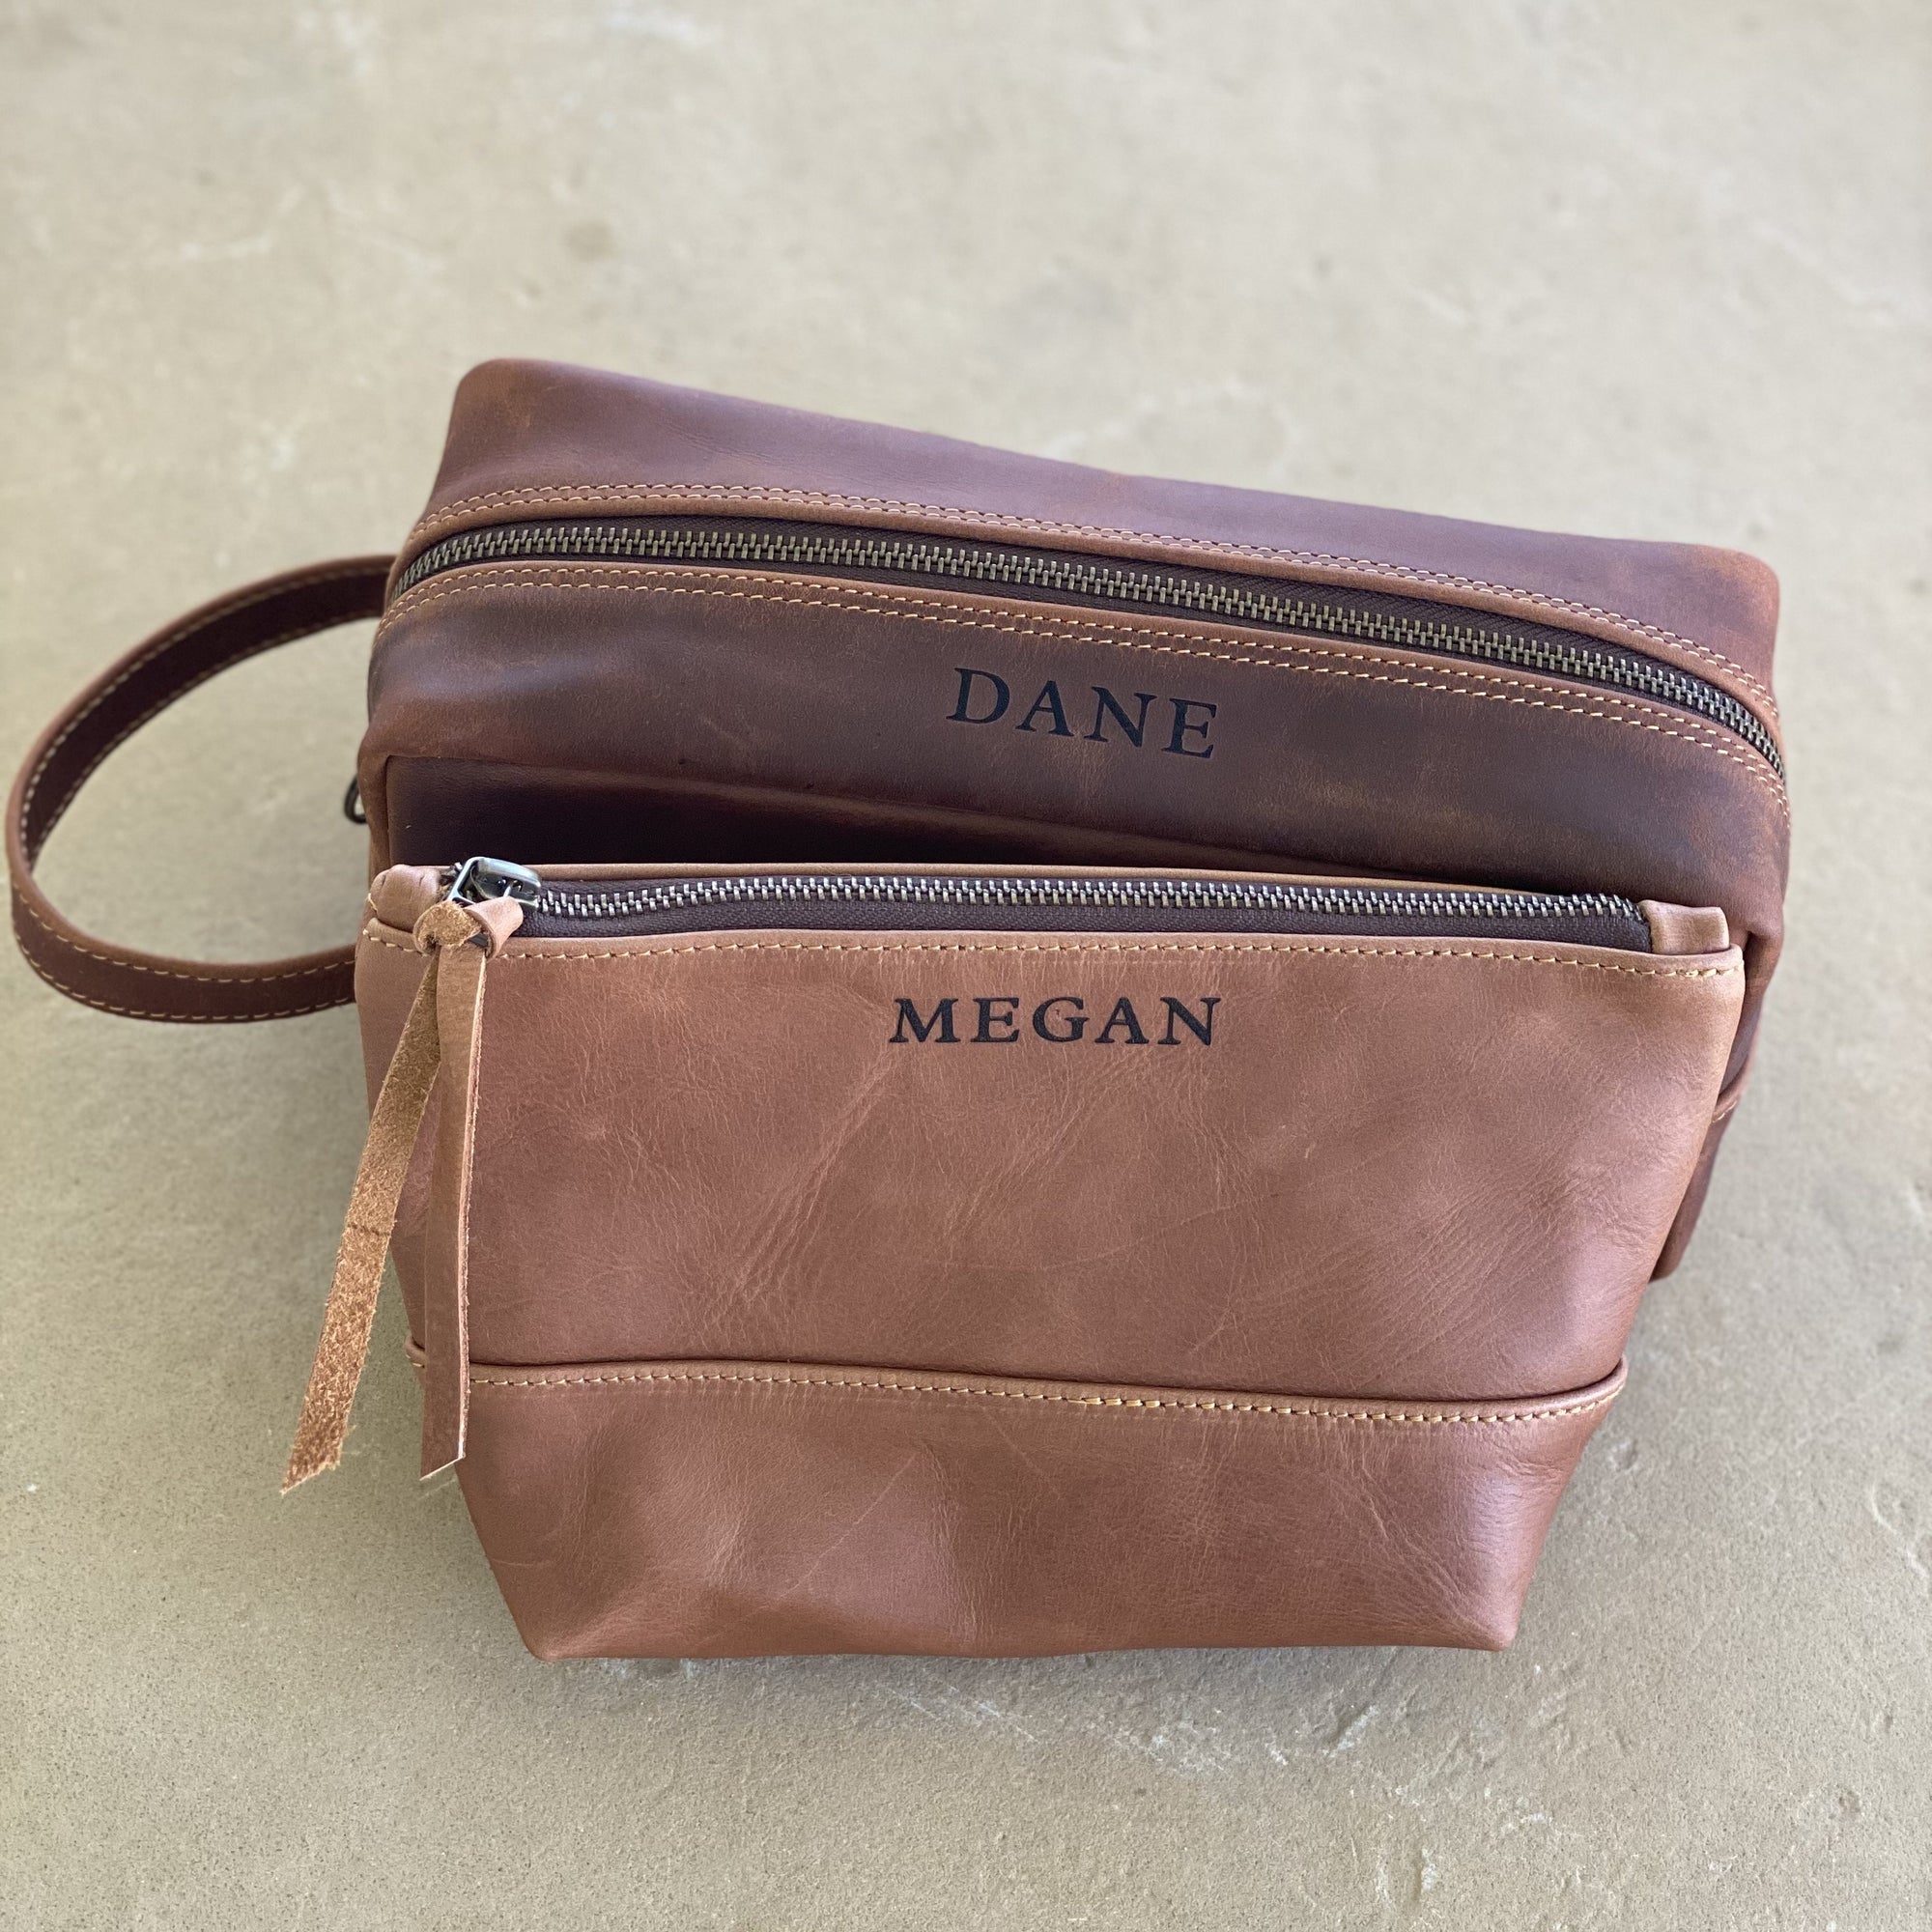 His & Hers Gifts : Leather Toiletry Case in Eggplant by R. Horns